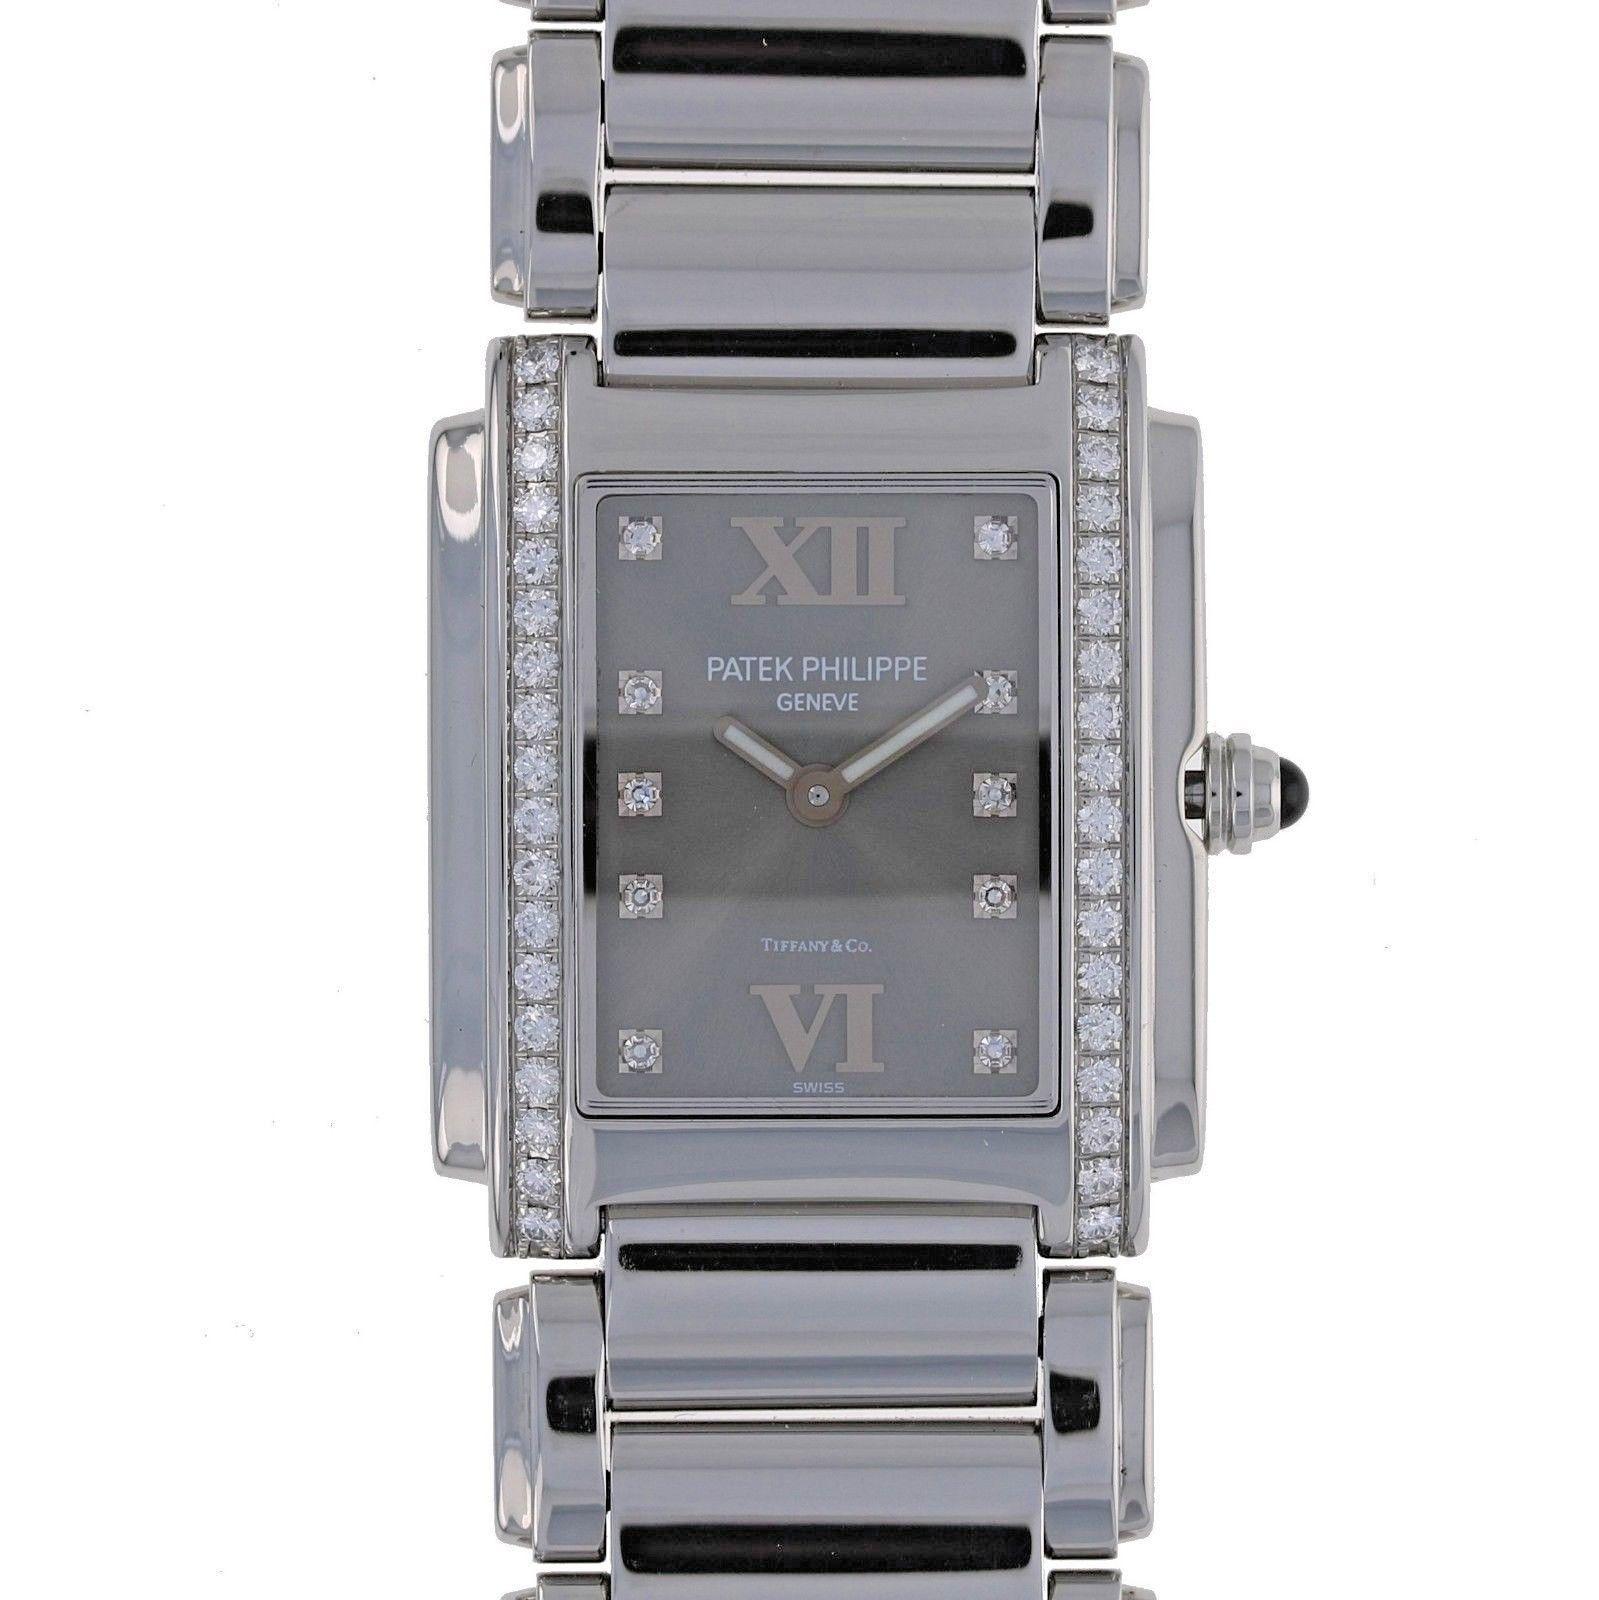 Brand Name  Patek Philippe
Style Number  4910/10a
Also Called  4910/10a-010
Series  Twenty-4
Gender  Ladies
Case Material  Stainless Steel
Dial Color  Grey
Movement  Quartz
Engine  Cal. E-15
Functions  Hours, Minutes
Crystal Material  Sapphire
Case